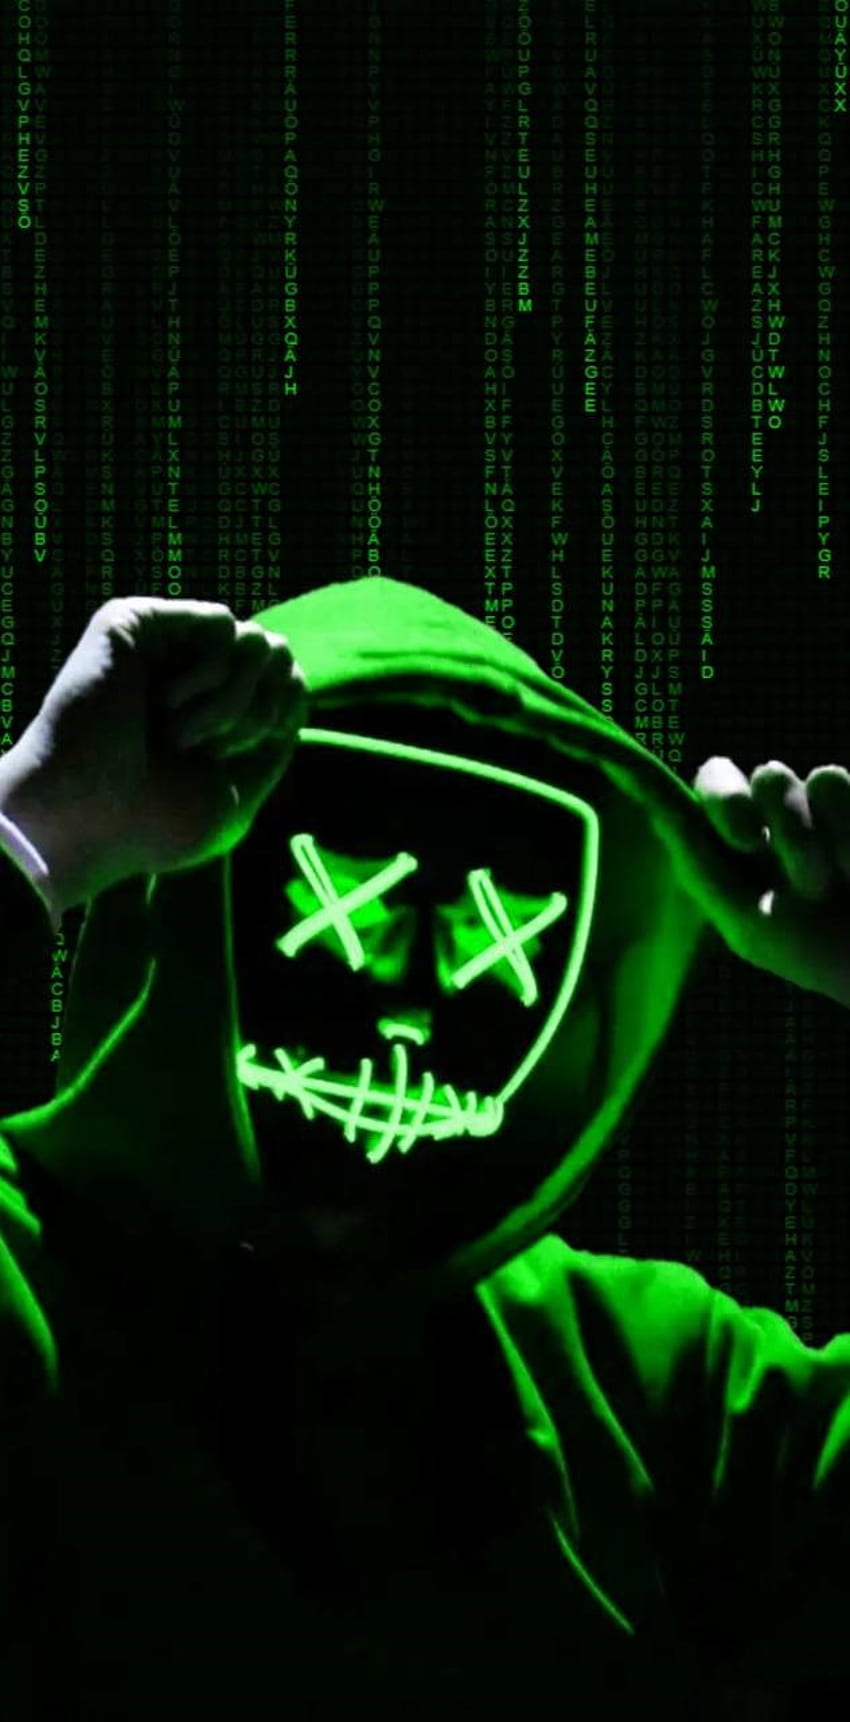 Hacker : Top Hackers Background [ ], Hacking Android HD phone wallpaper